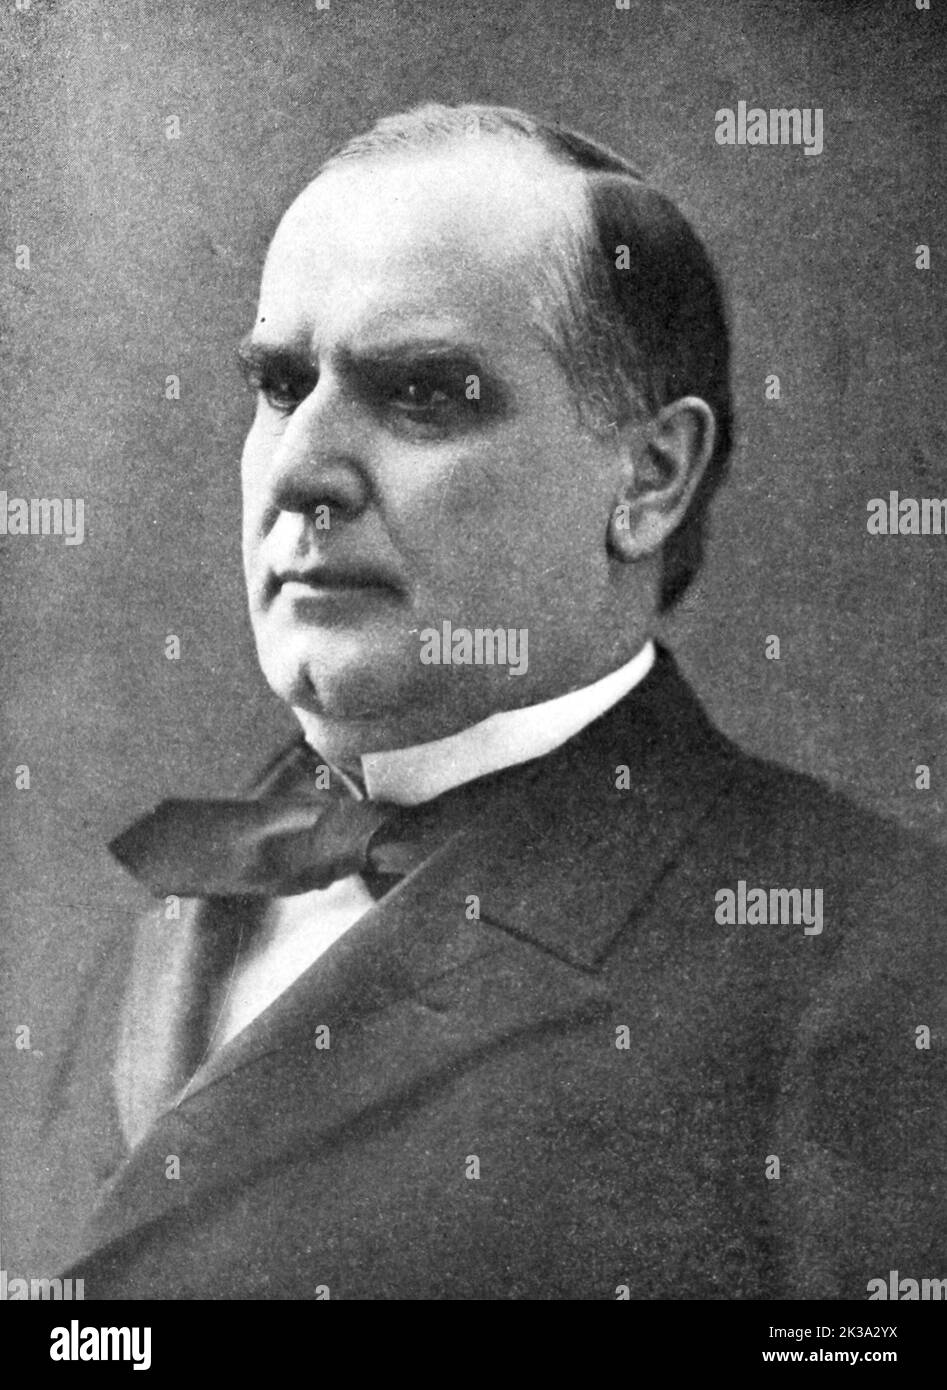 A portrait of US President William McKinley. McKinley was the 25th president of the USA, and the third of four to be assassinated. He was shot by Leon Czolgosz on 6th September 1901. Like James Garfield, McKinley briefly recovered from the wounds, to die of sepsis some time later. In this engraving he is seen as a presidential candidate. Stock Photo